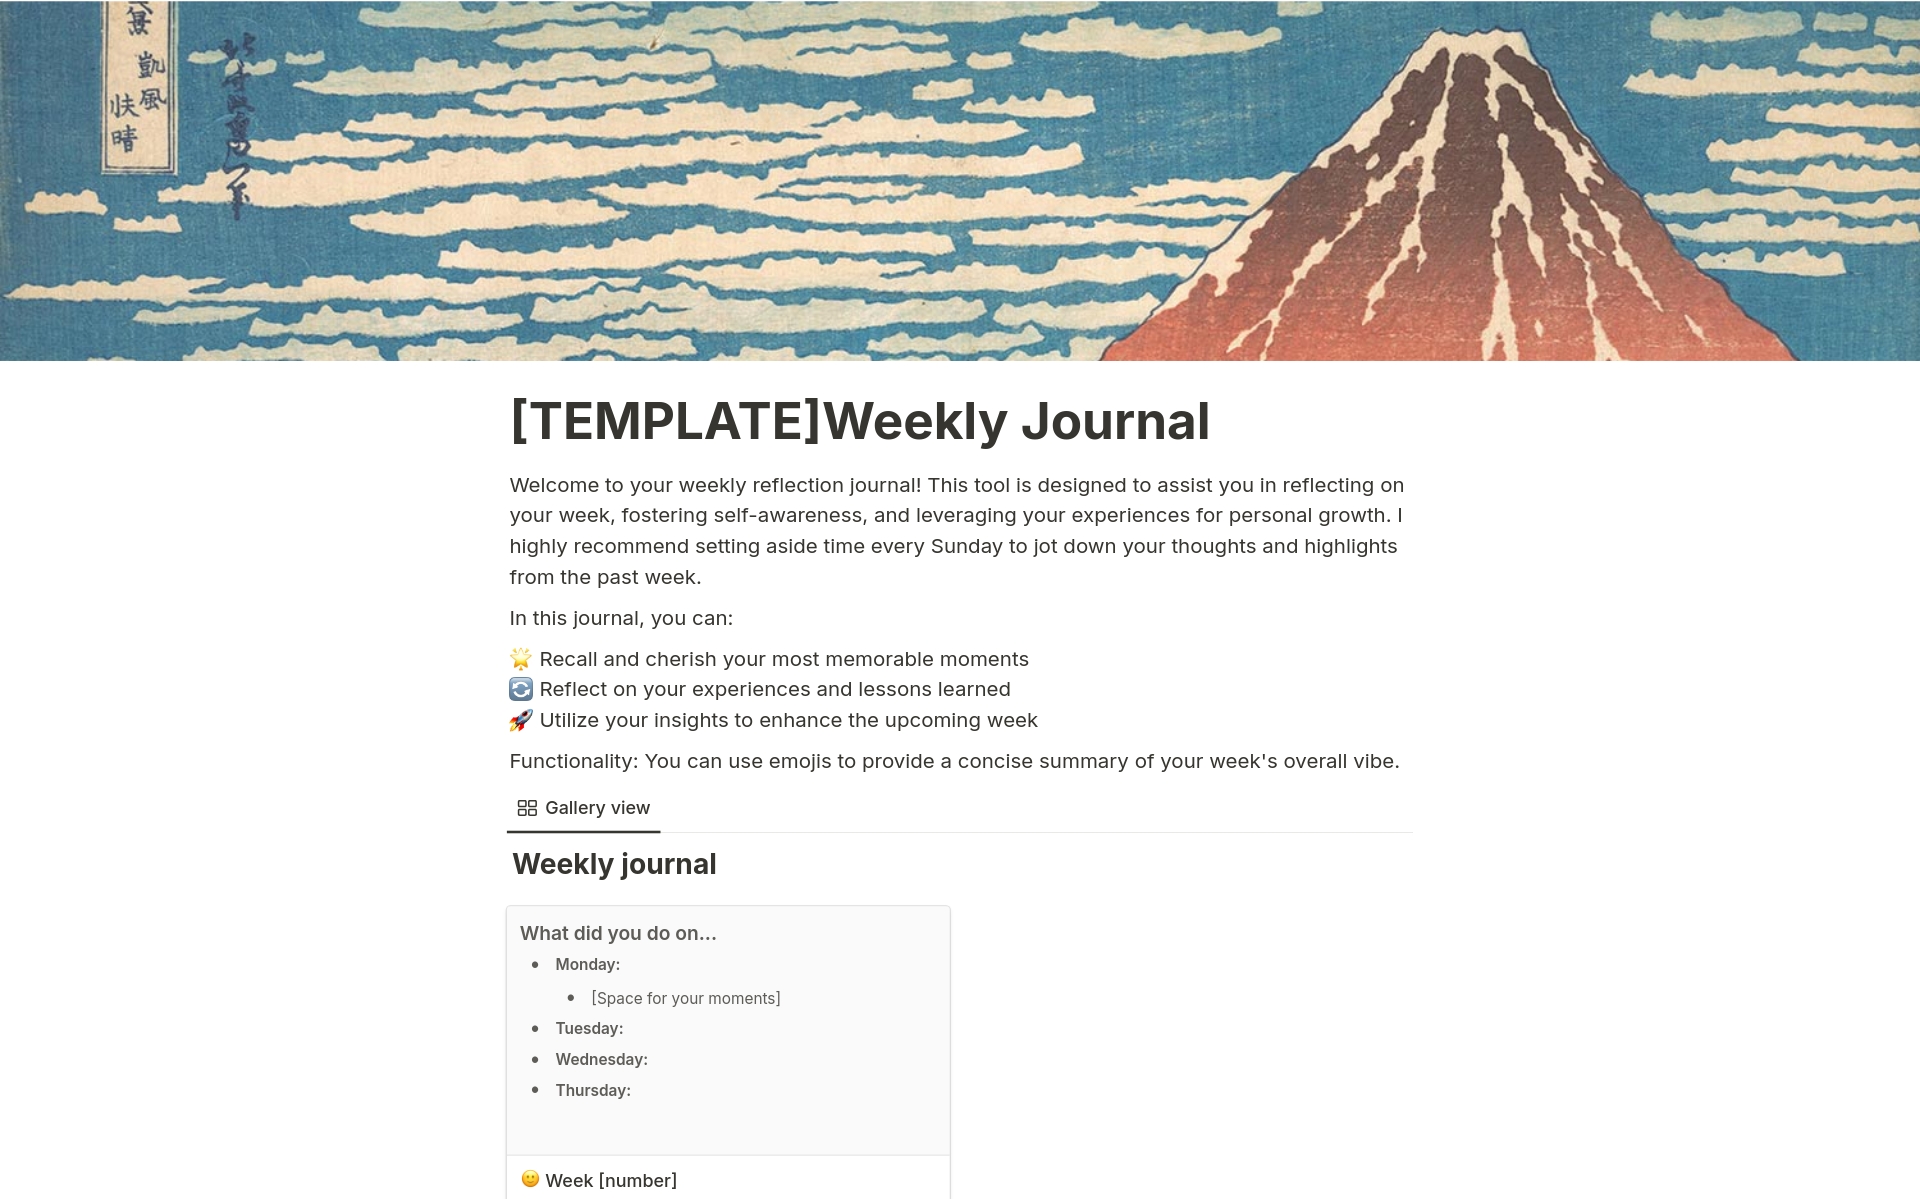 This is a weekly journal. It helps you remember important moments and think about the best parts and lessons from your week.